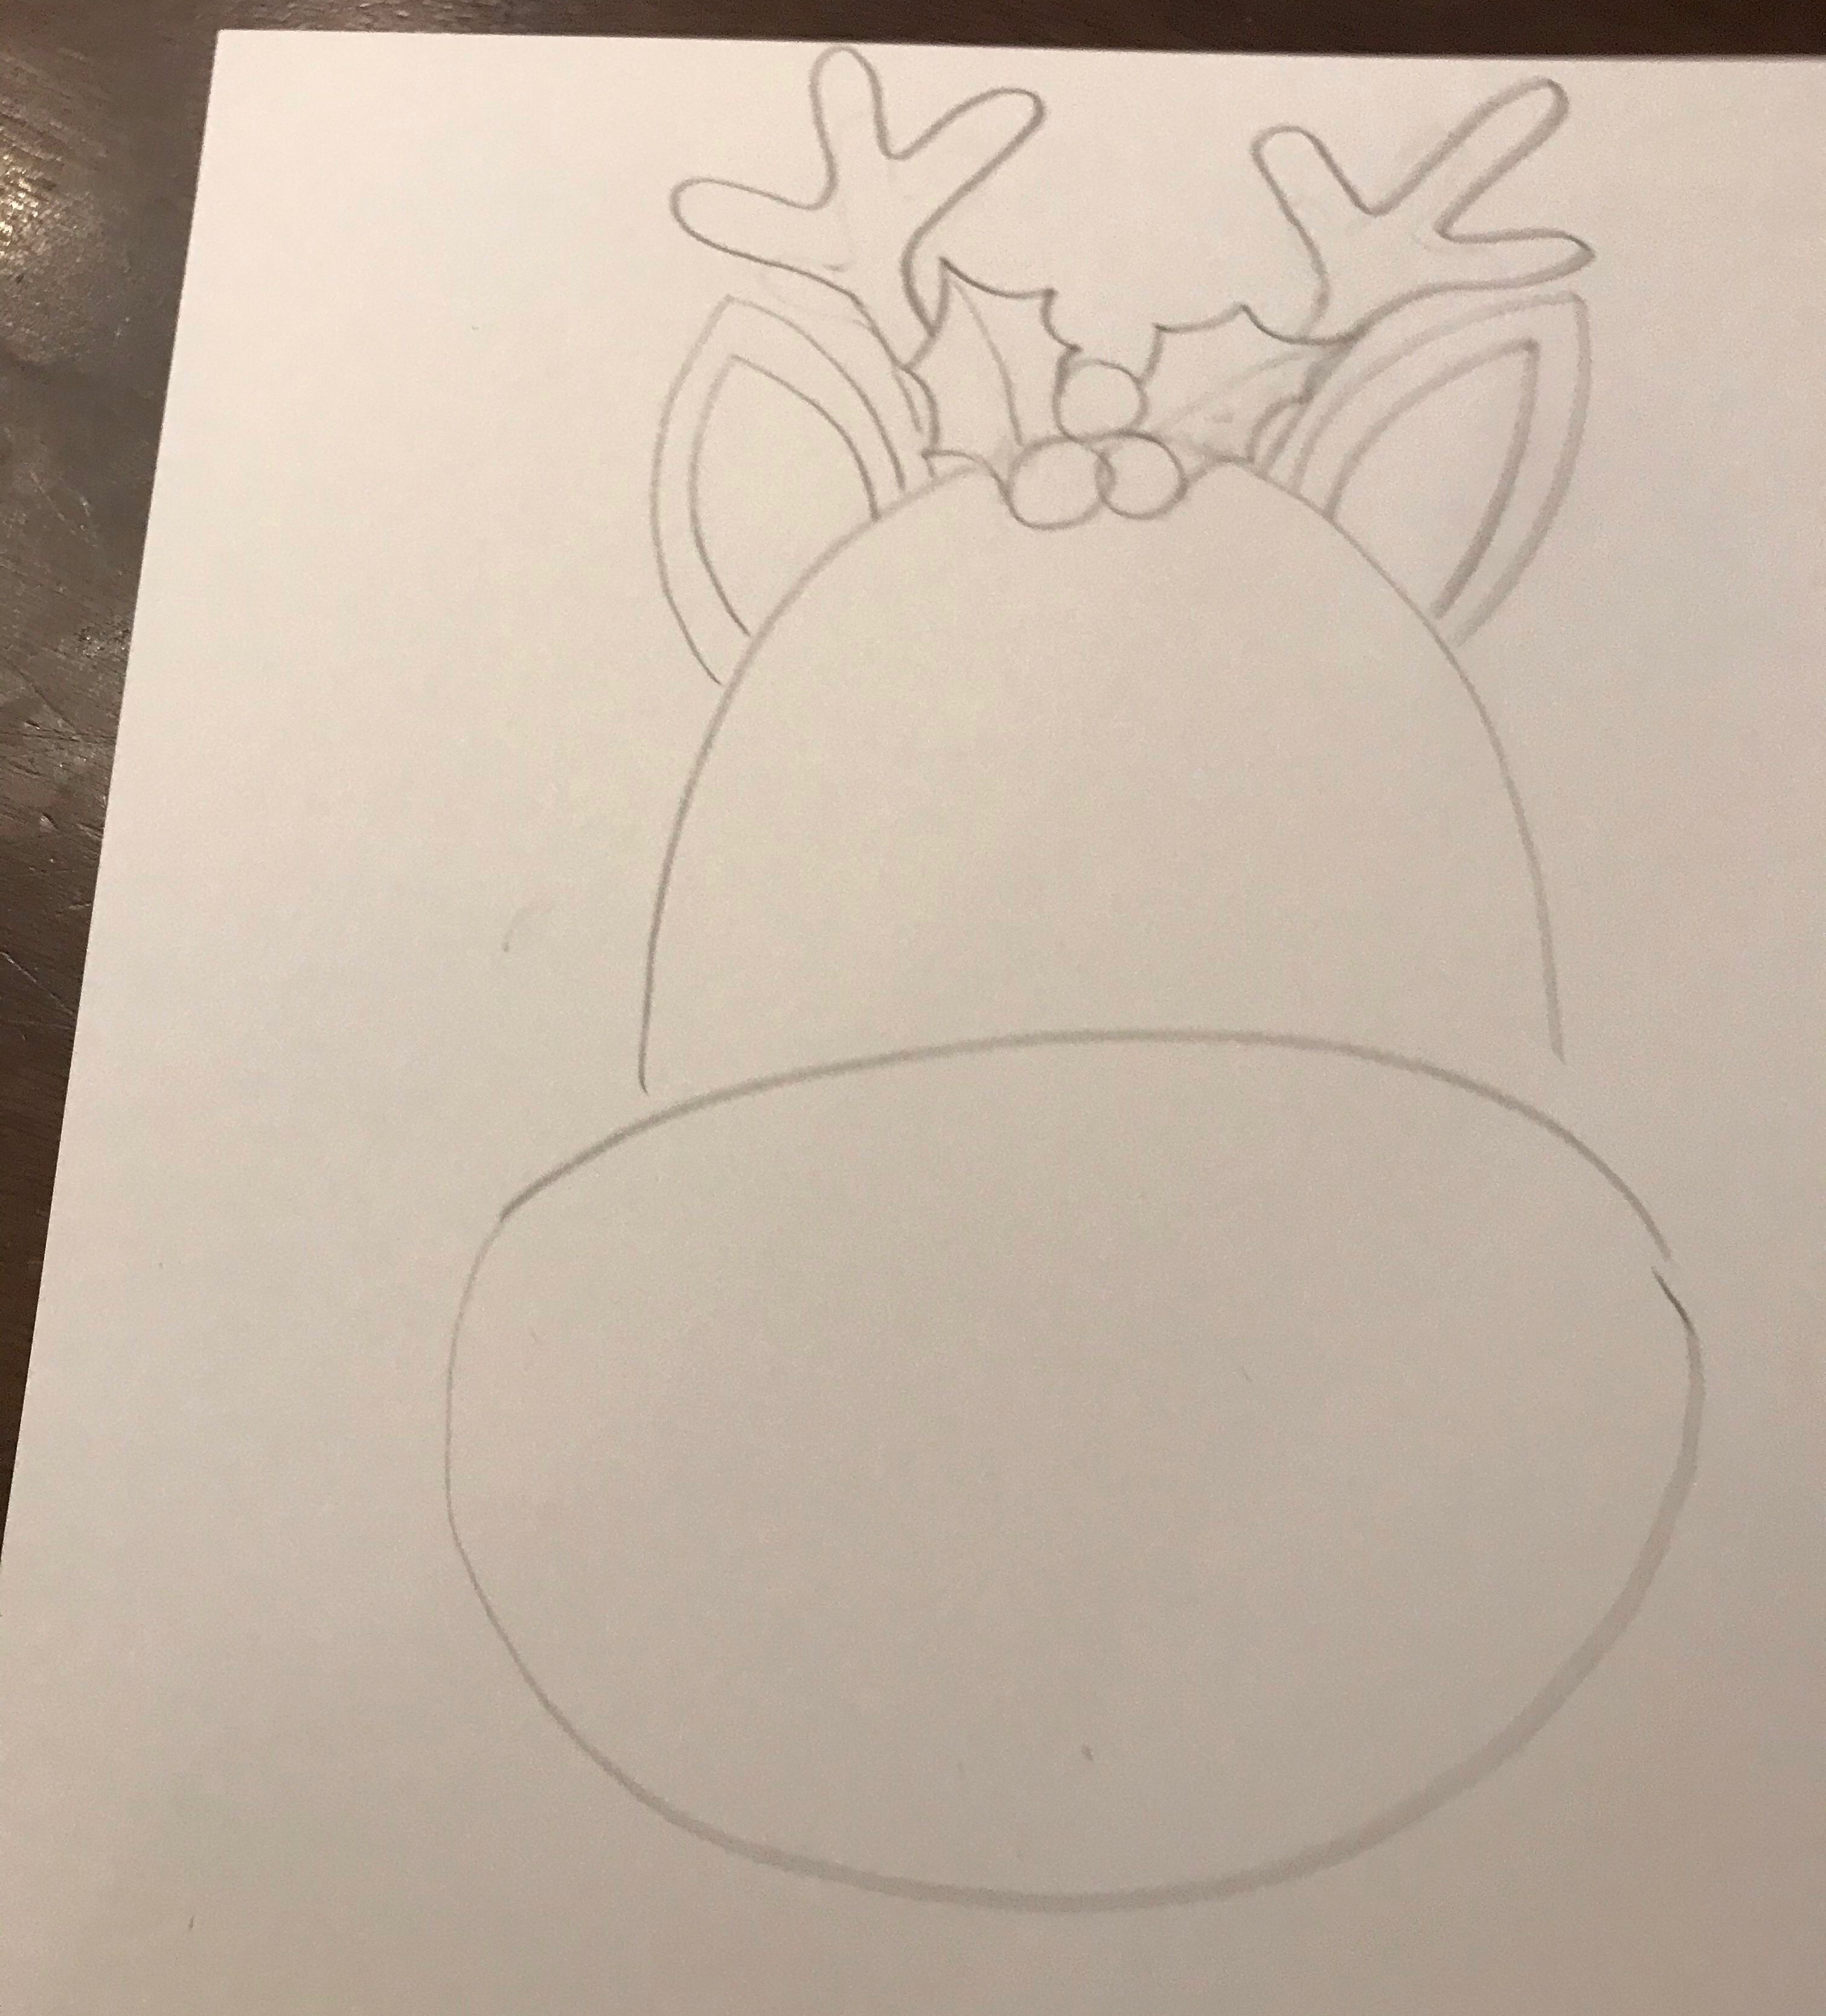 How to draw a reindeer face | Simple Drawings For Beginners - YouTube